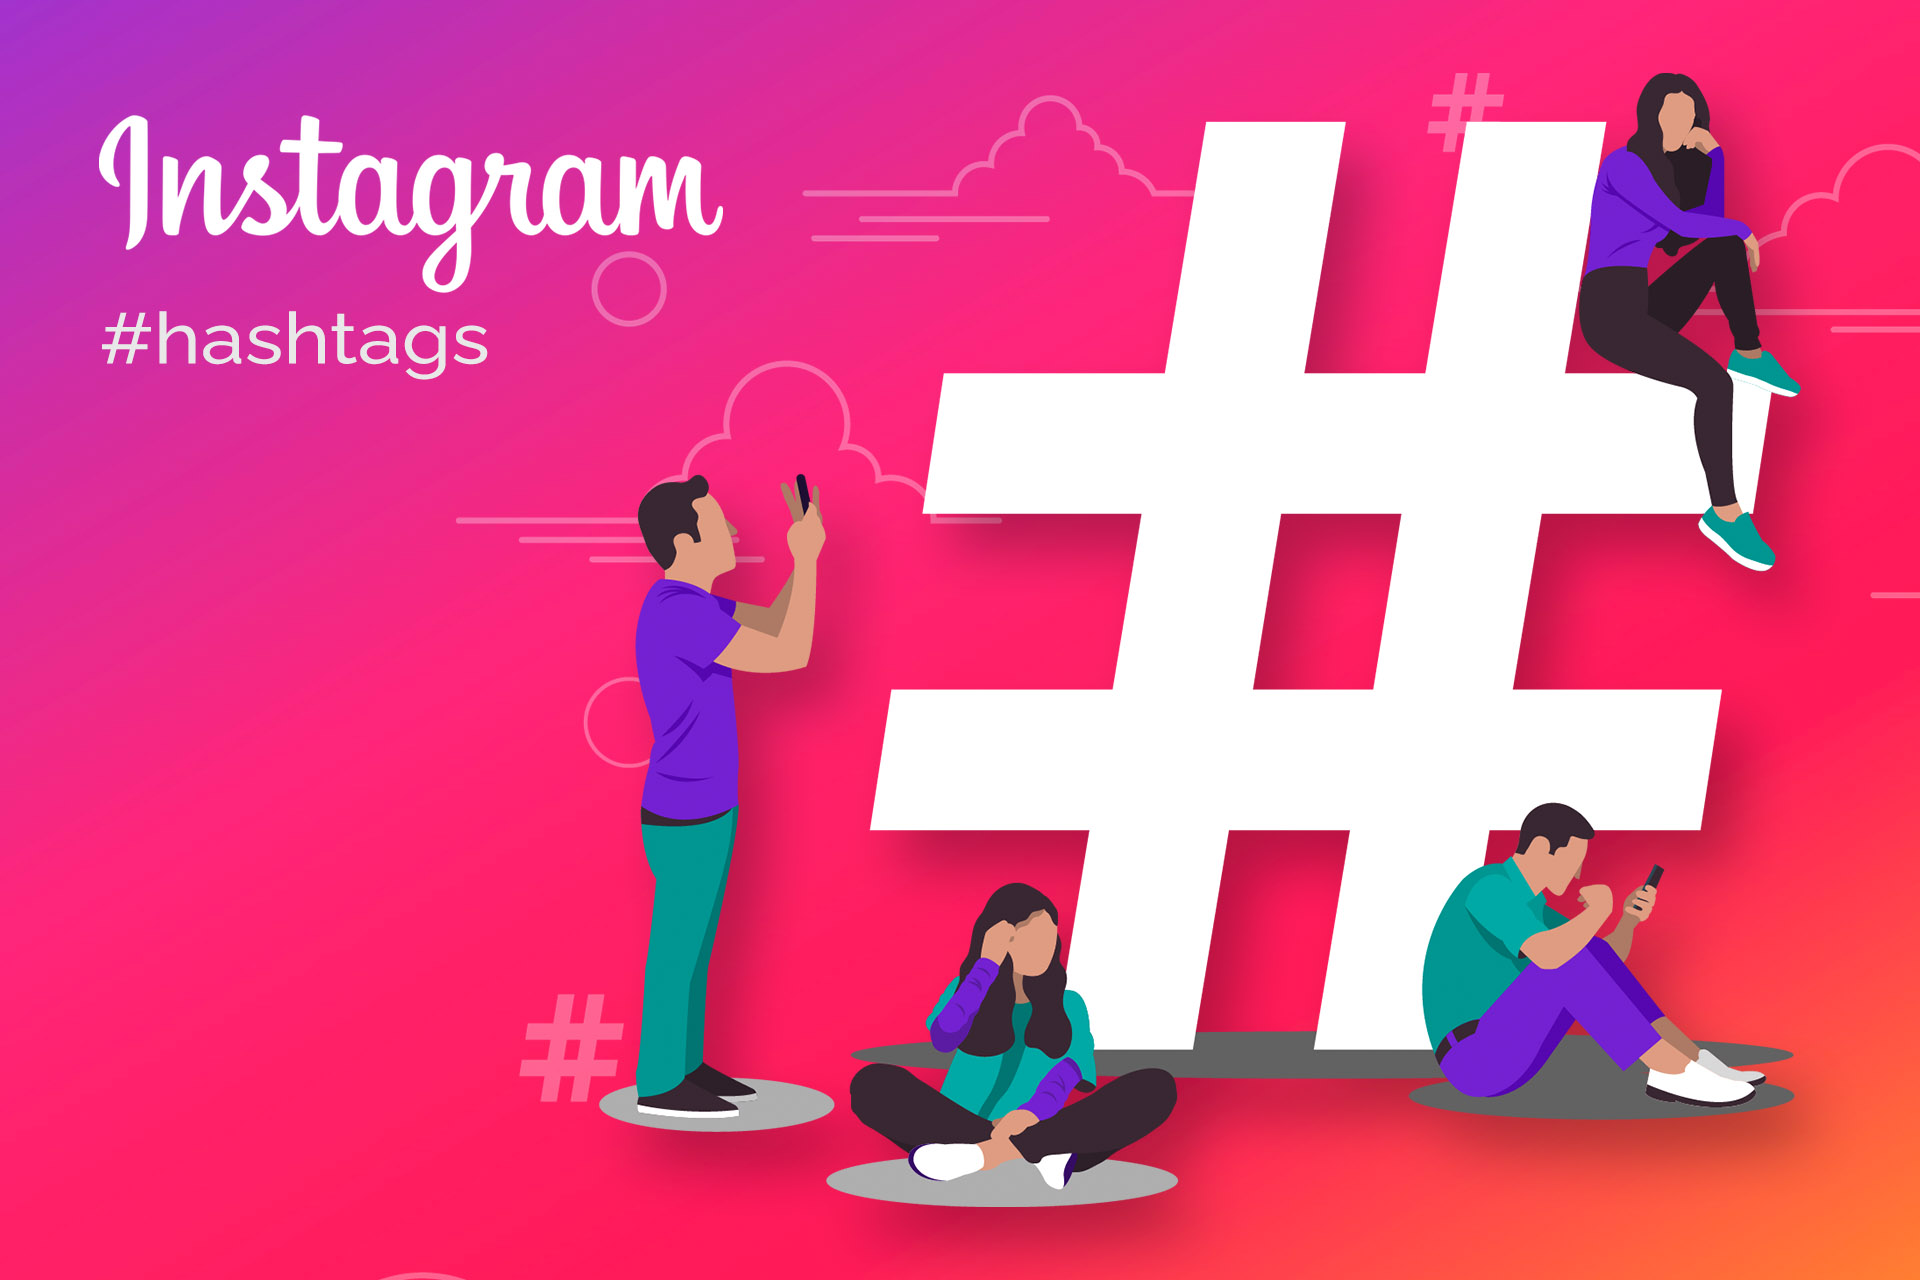 What Are The Most Popular Instagram Hashtags?